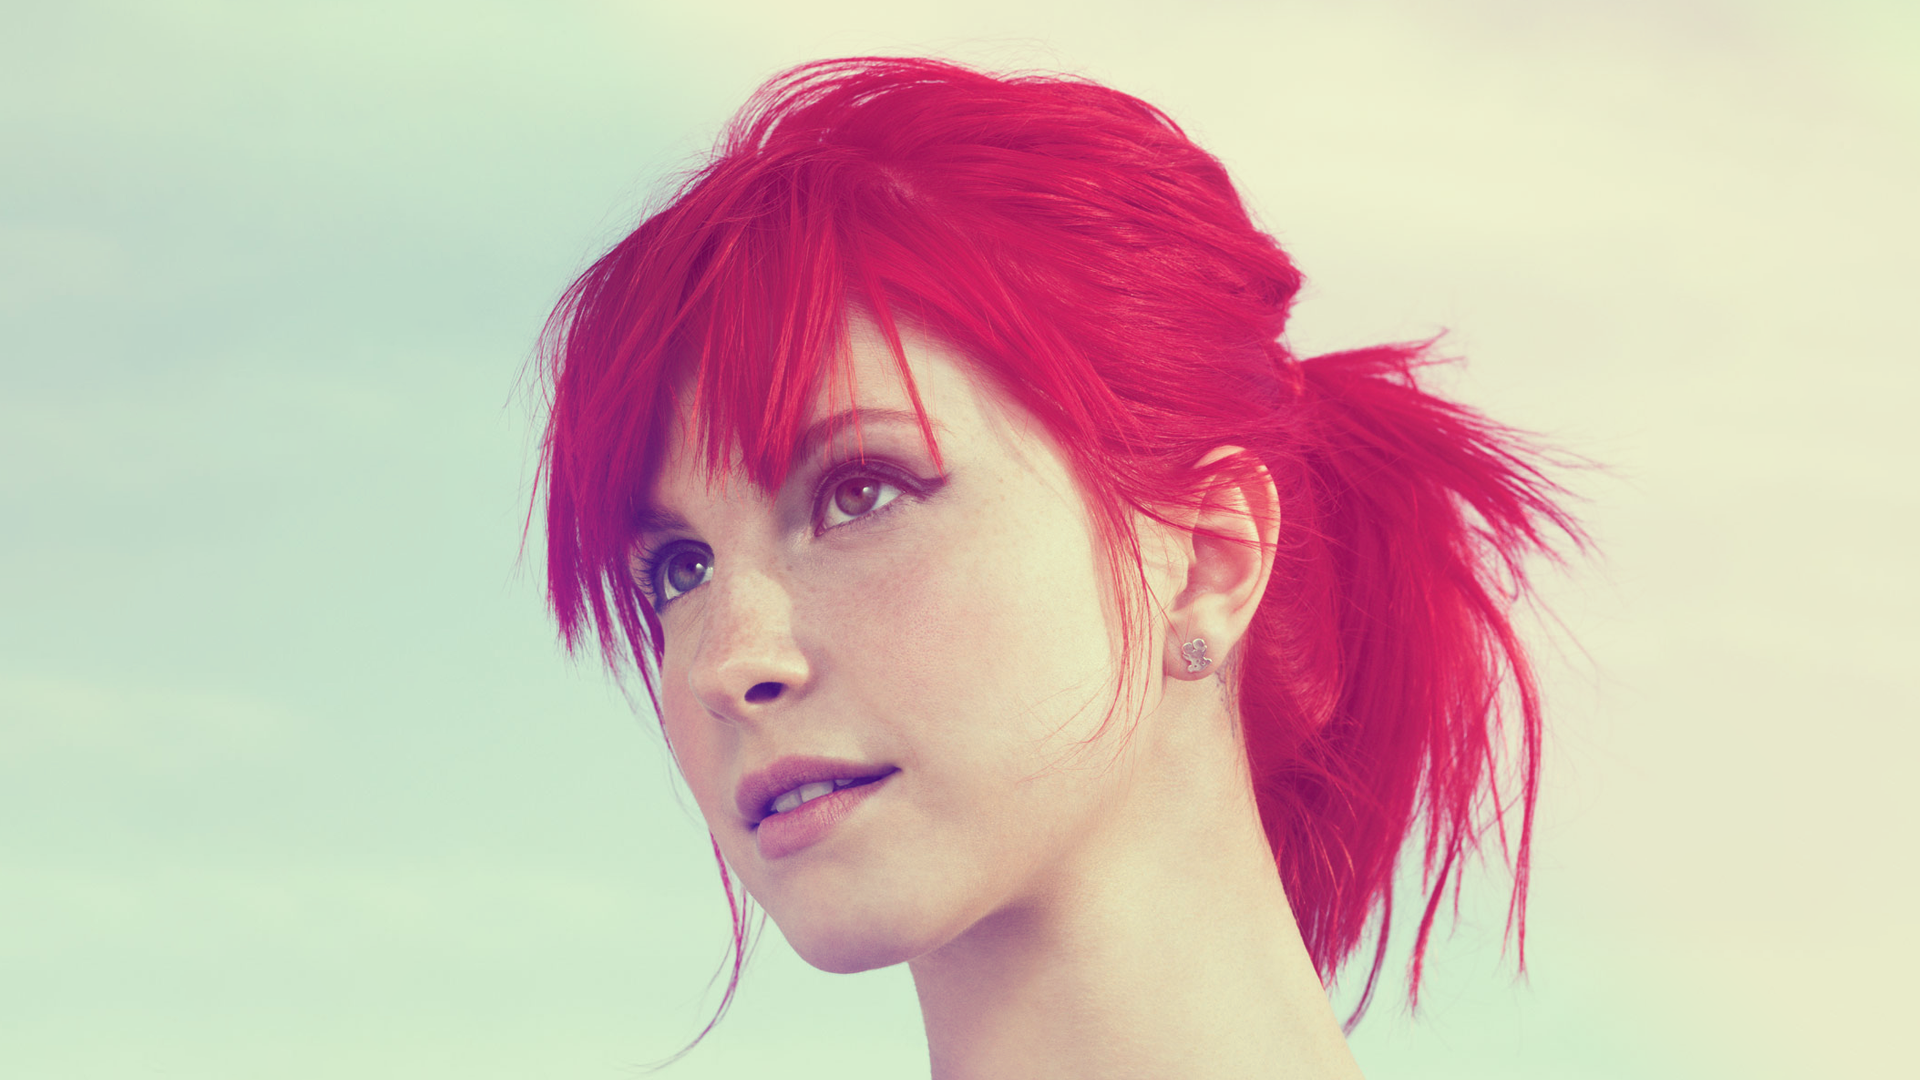 #freckles, #women, #dyed Hair, #redhead, #hayley Williams, - Hayley Williams Self Magazine Photoshoot , HD Wallpaper & Backgrounds